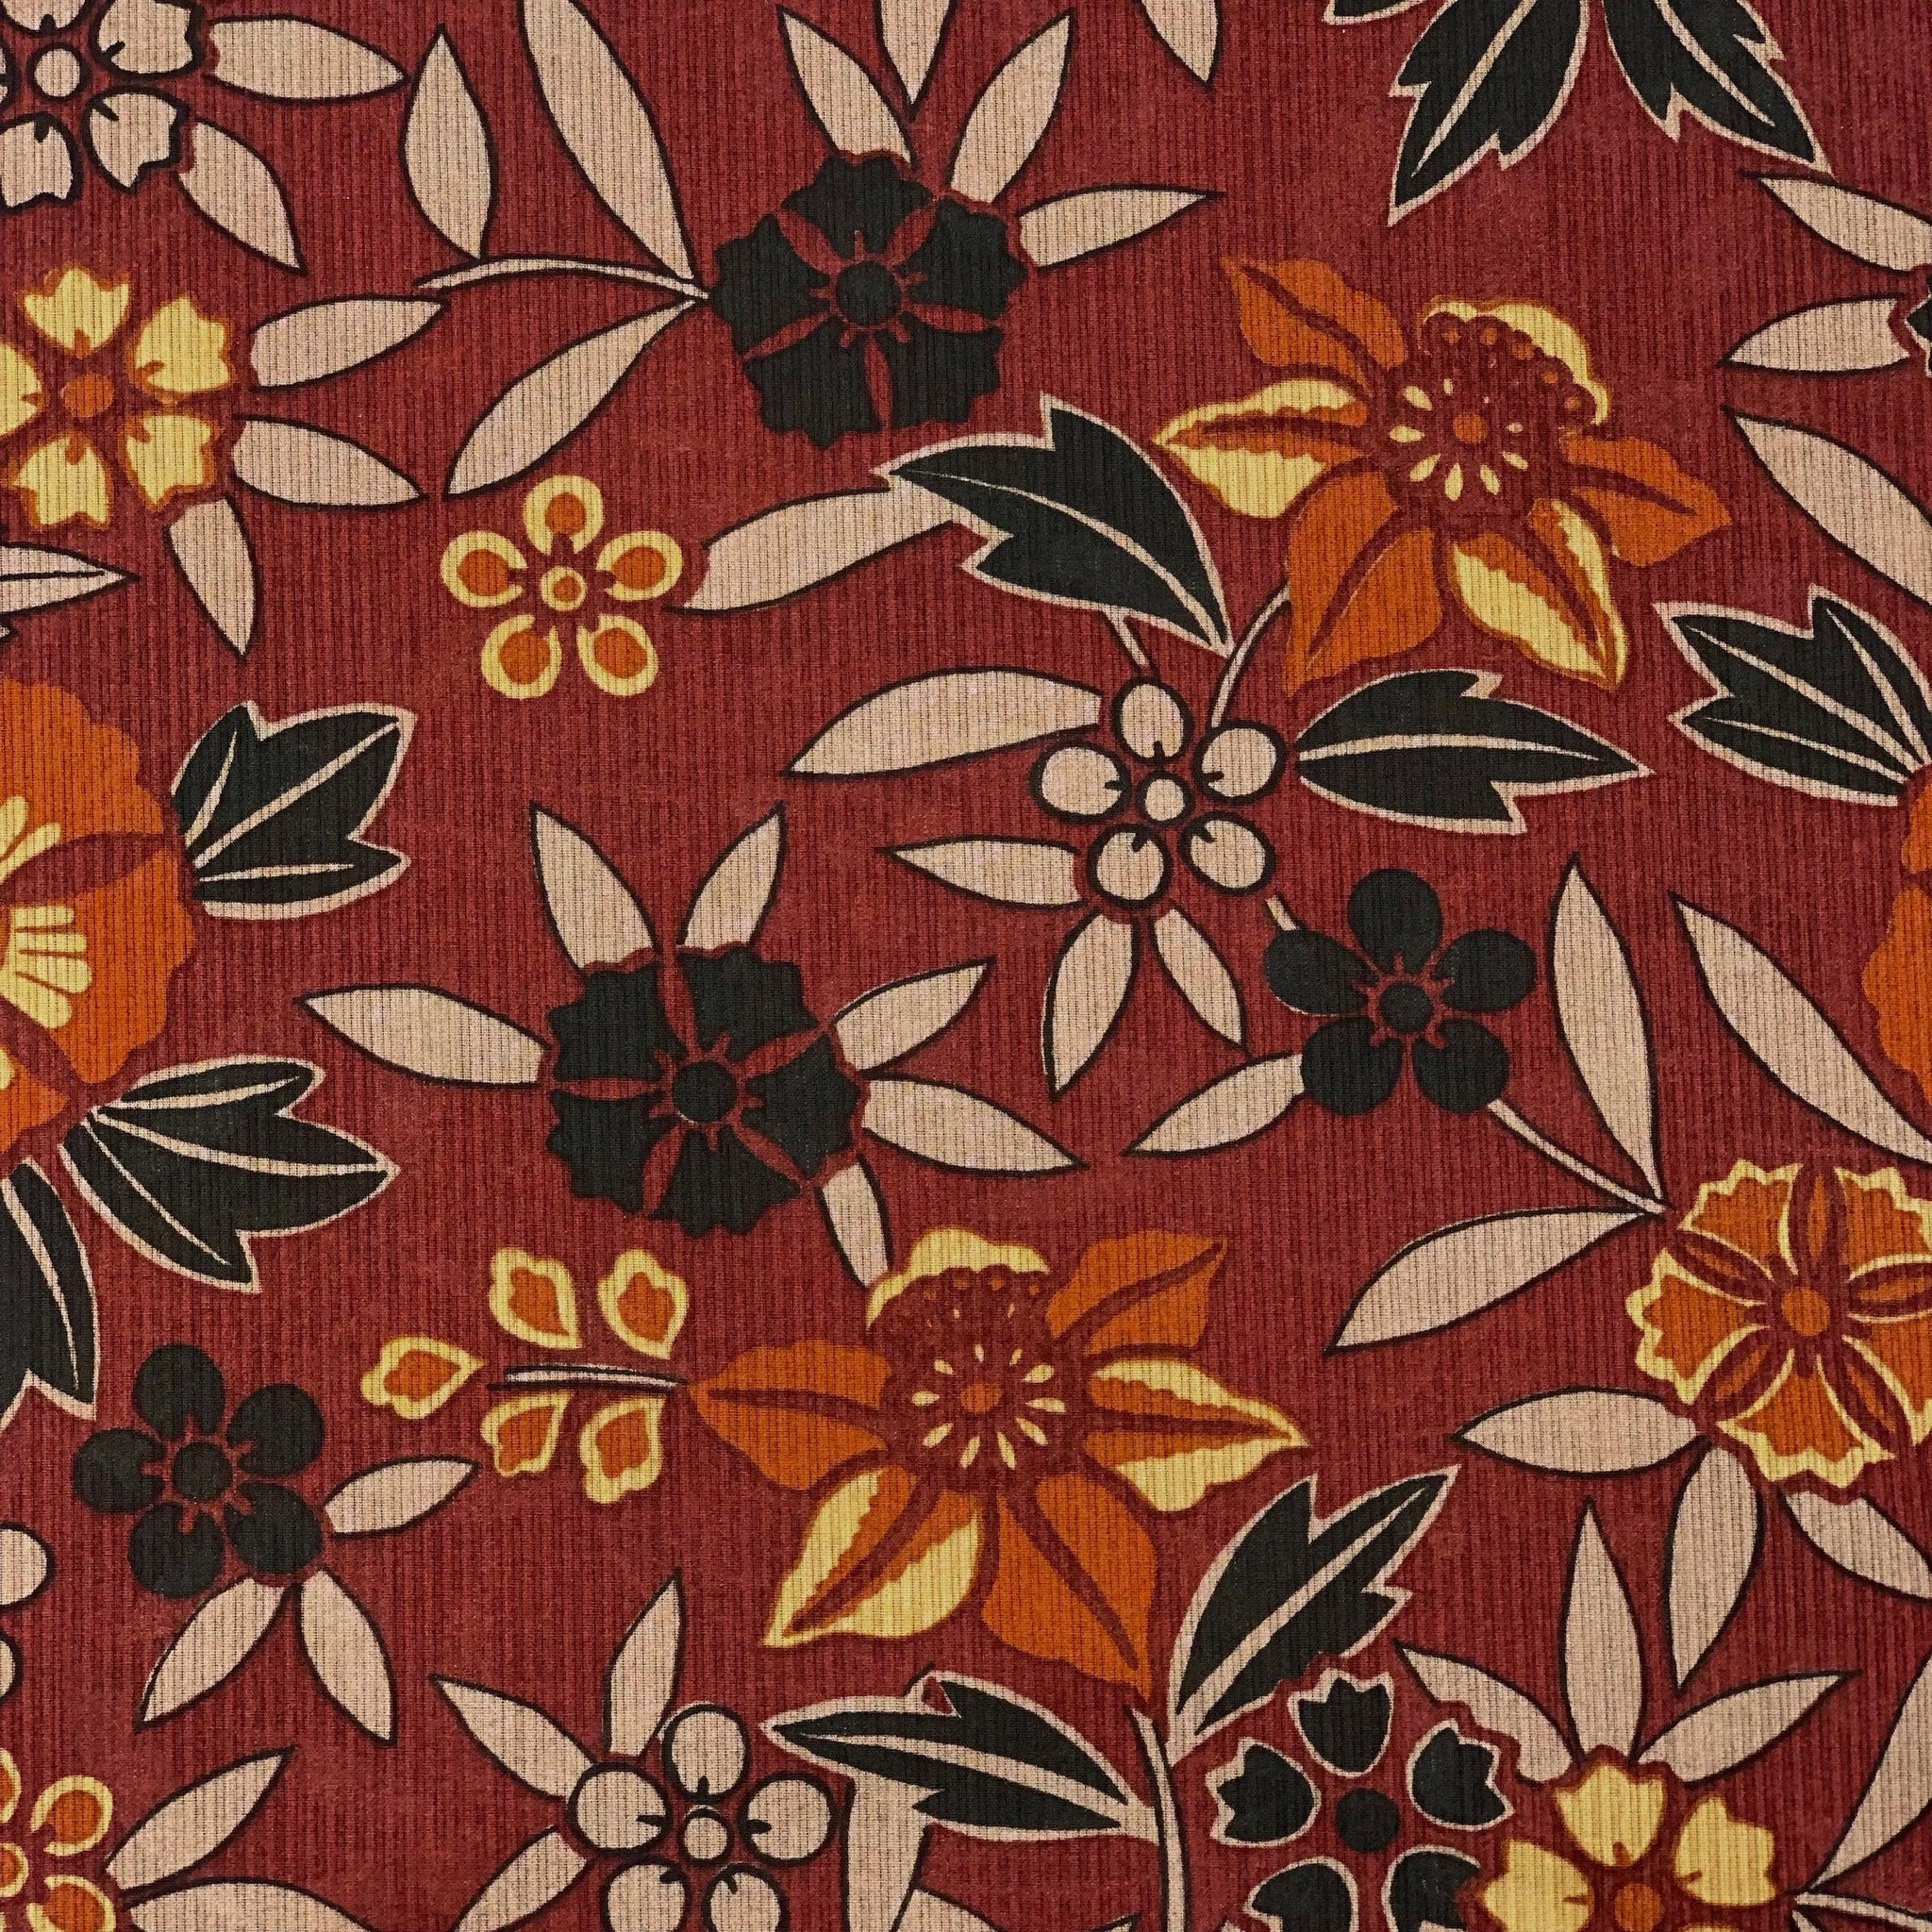 Kokka-Block Print Florals on Burgundy on Cotton Voile-fabric-gather here online